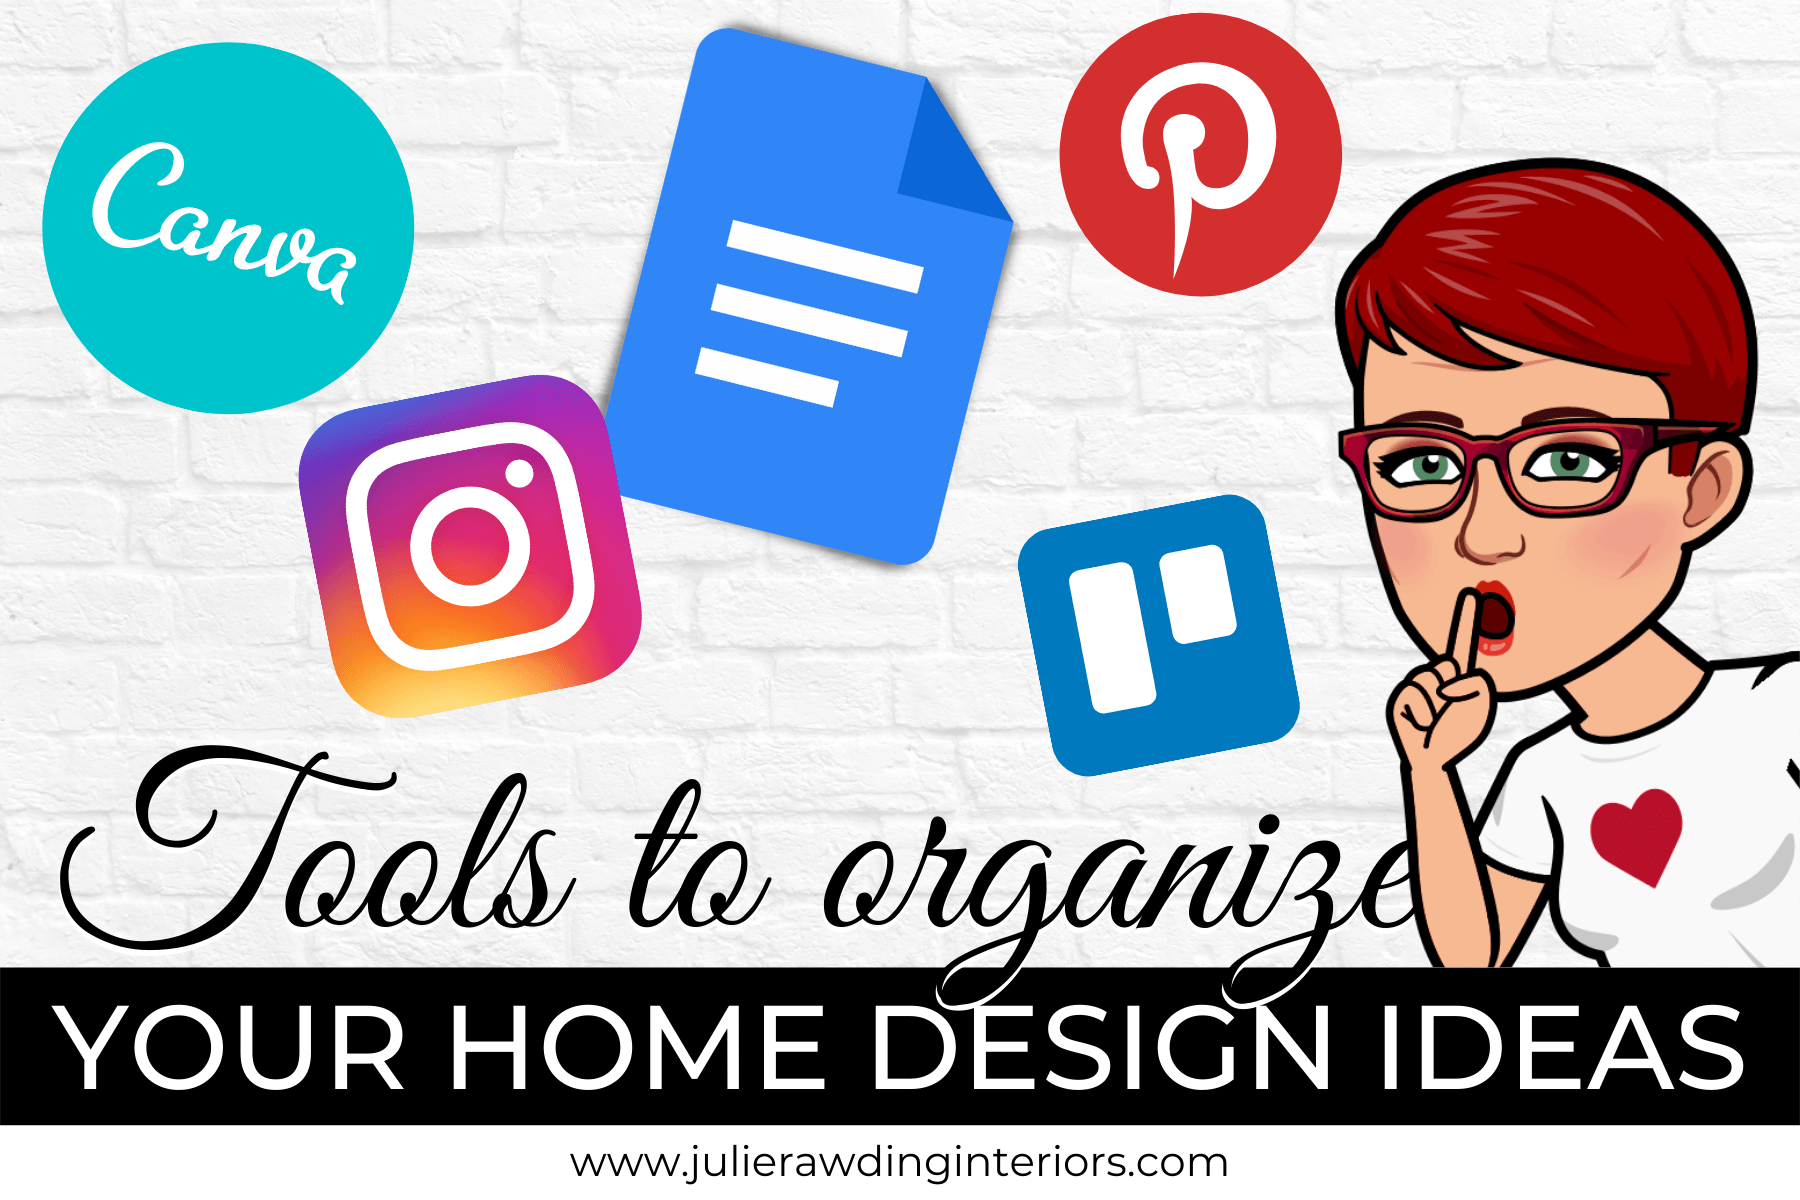 Tools to organize your home design ideas - blog title image